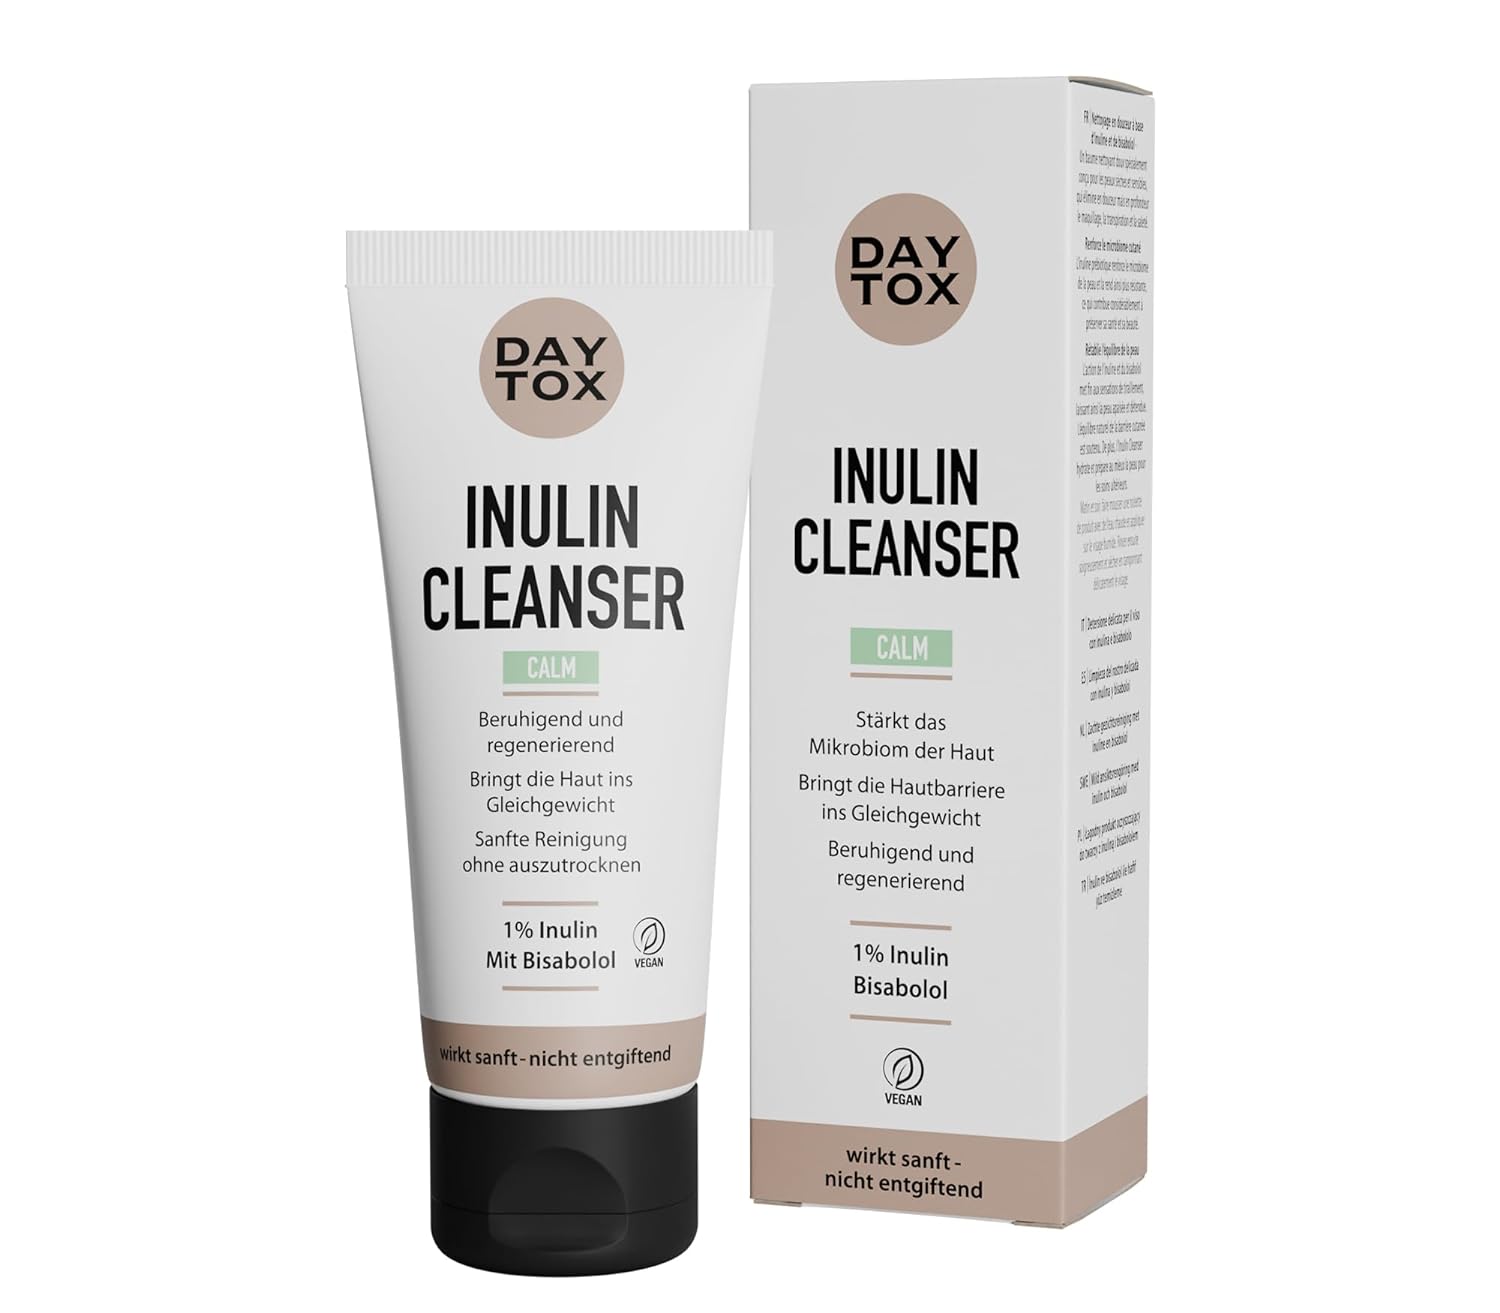 Inulin Cleanser - Gentle Cleansing Balm for very dry and sensitive skin - 1% Prebiotic inulin - Made in Germany - Daytox - 125 ml